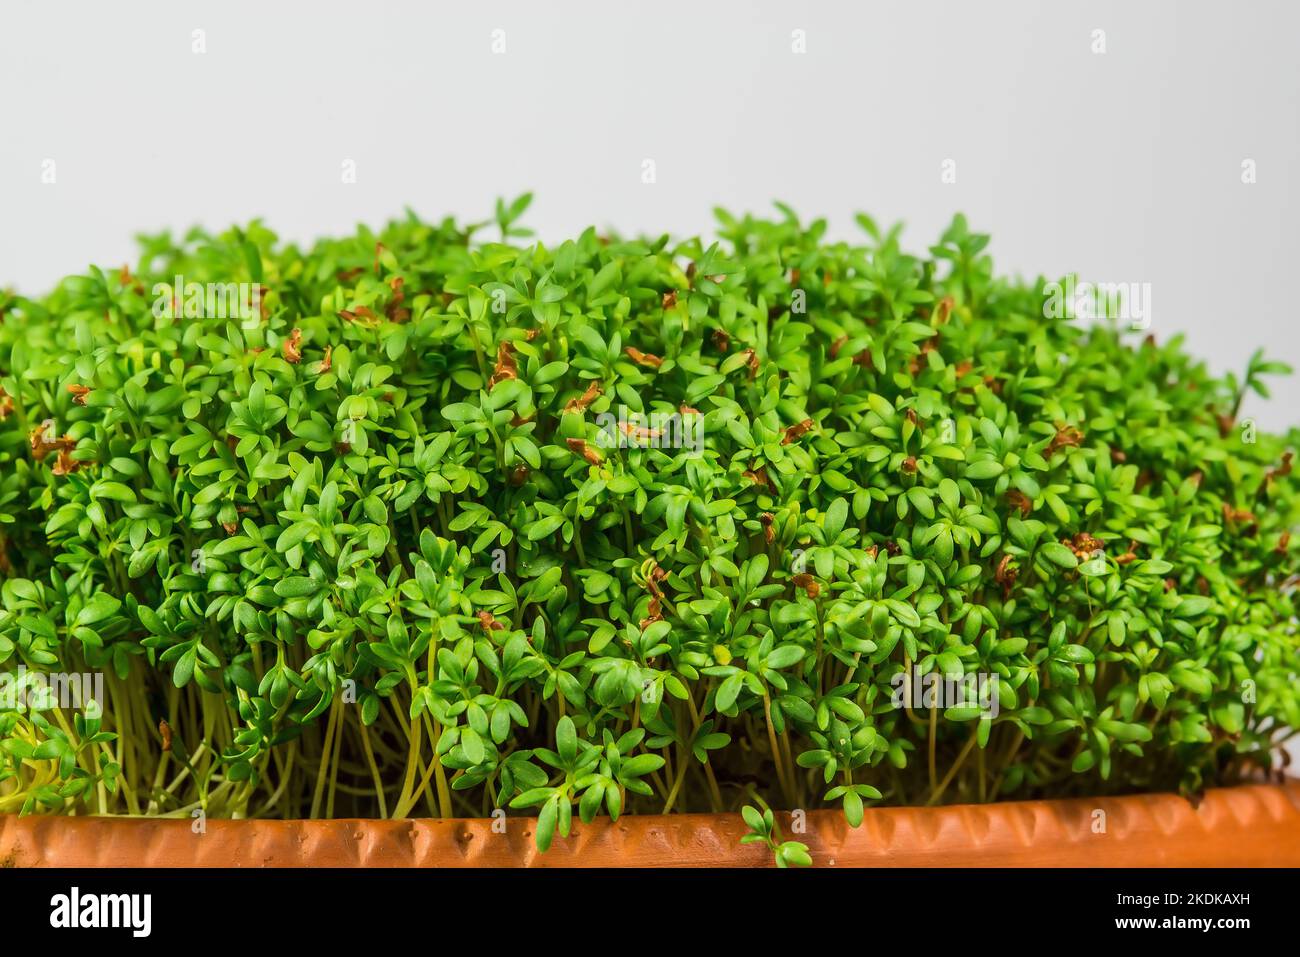 cress, young shoots in a closeup Stock Photo